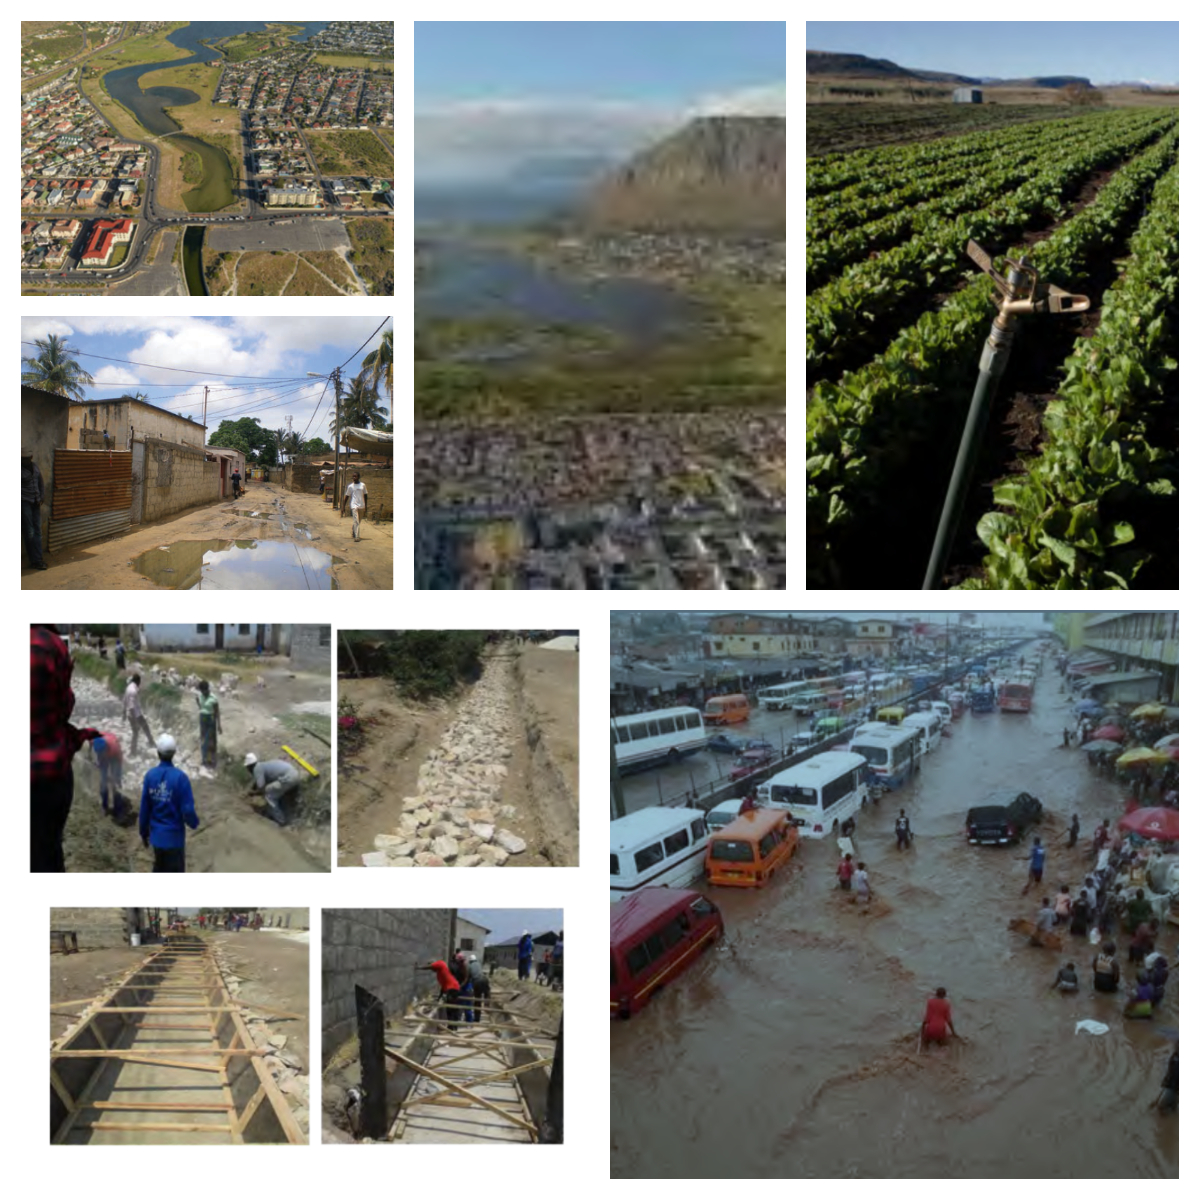 Images of climate problems and solutions in Africa.